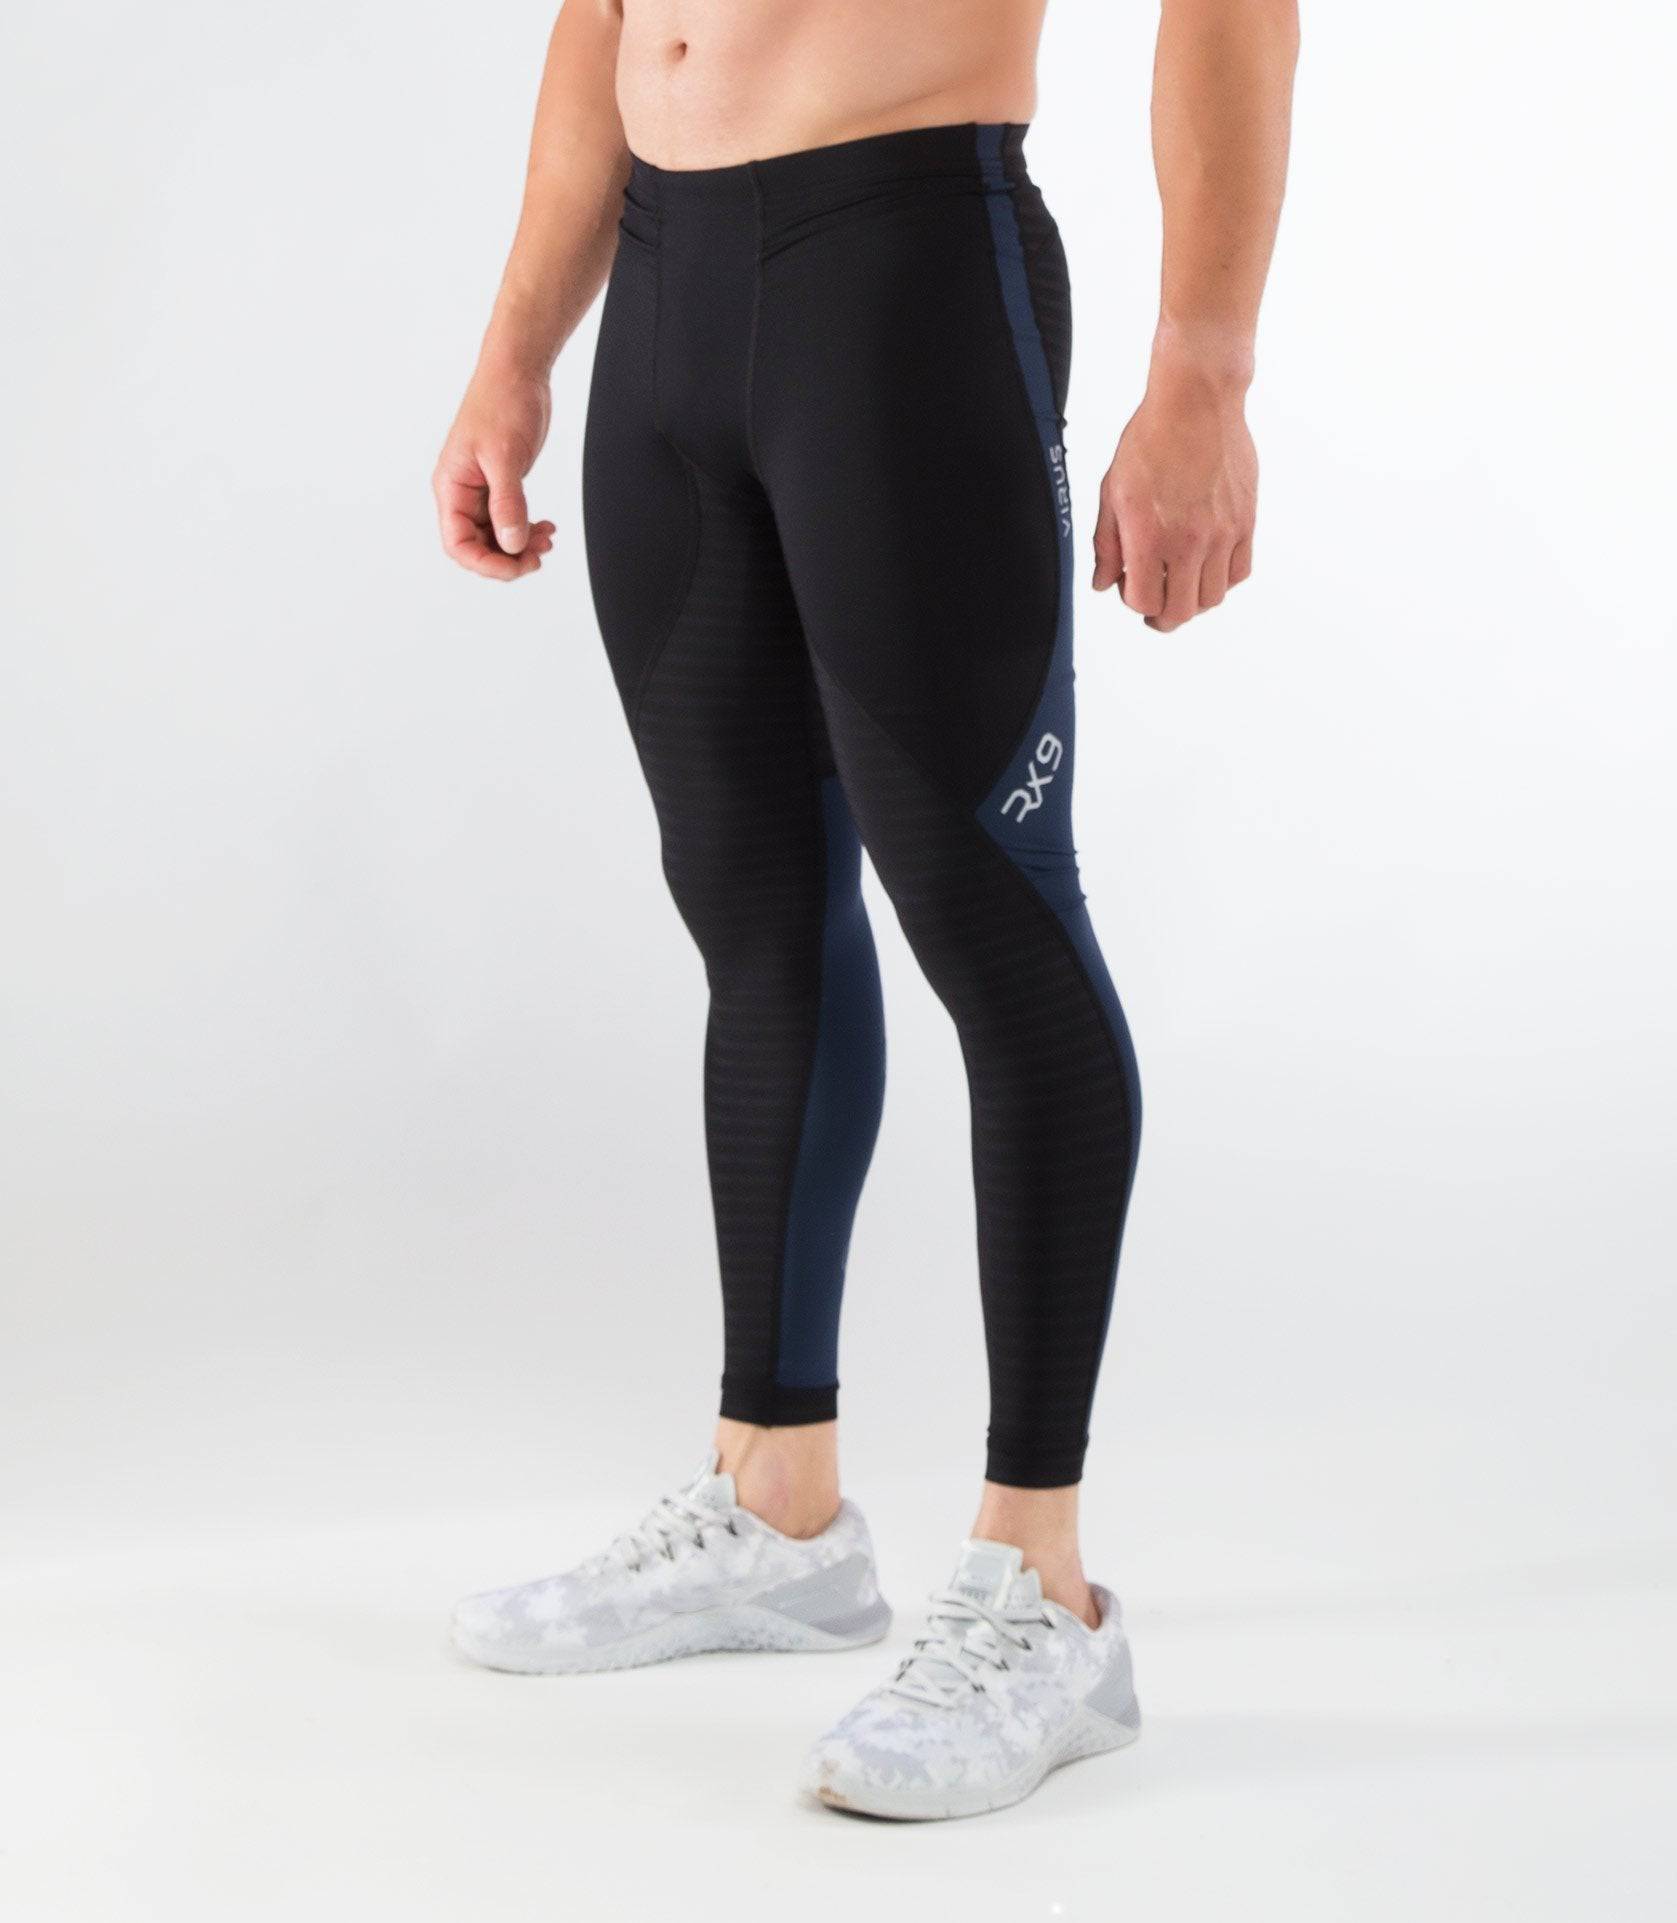 Virus | CO38 Align Stay Cool Compression Pants